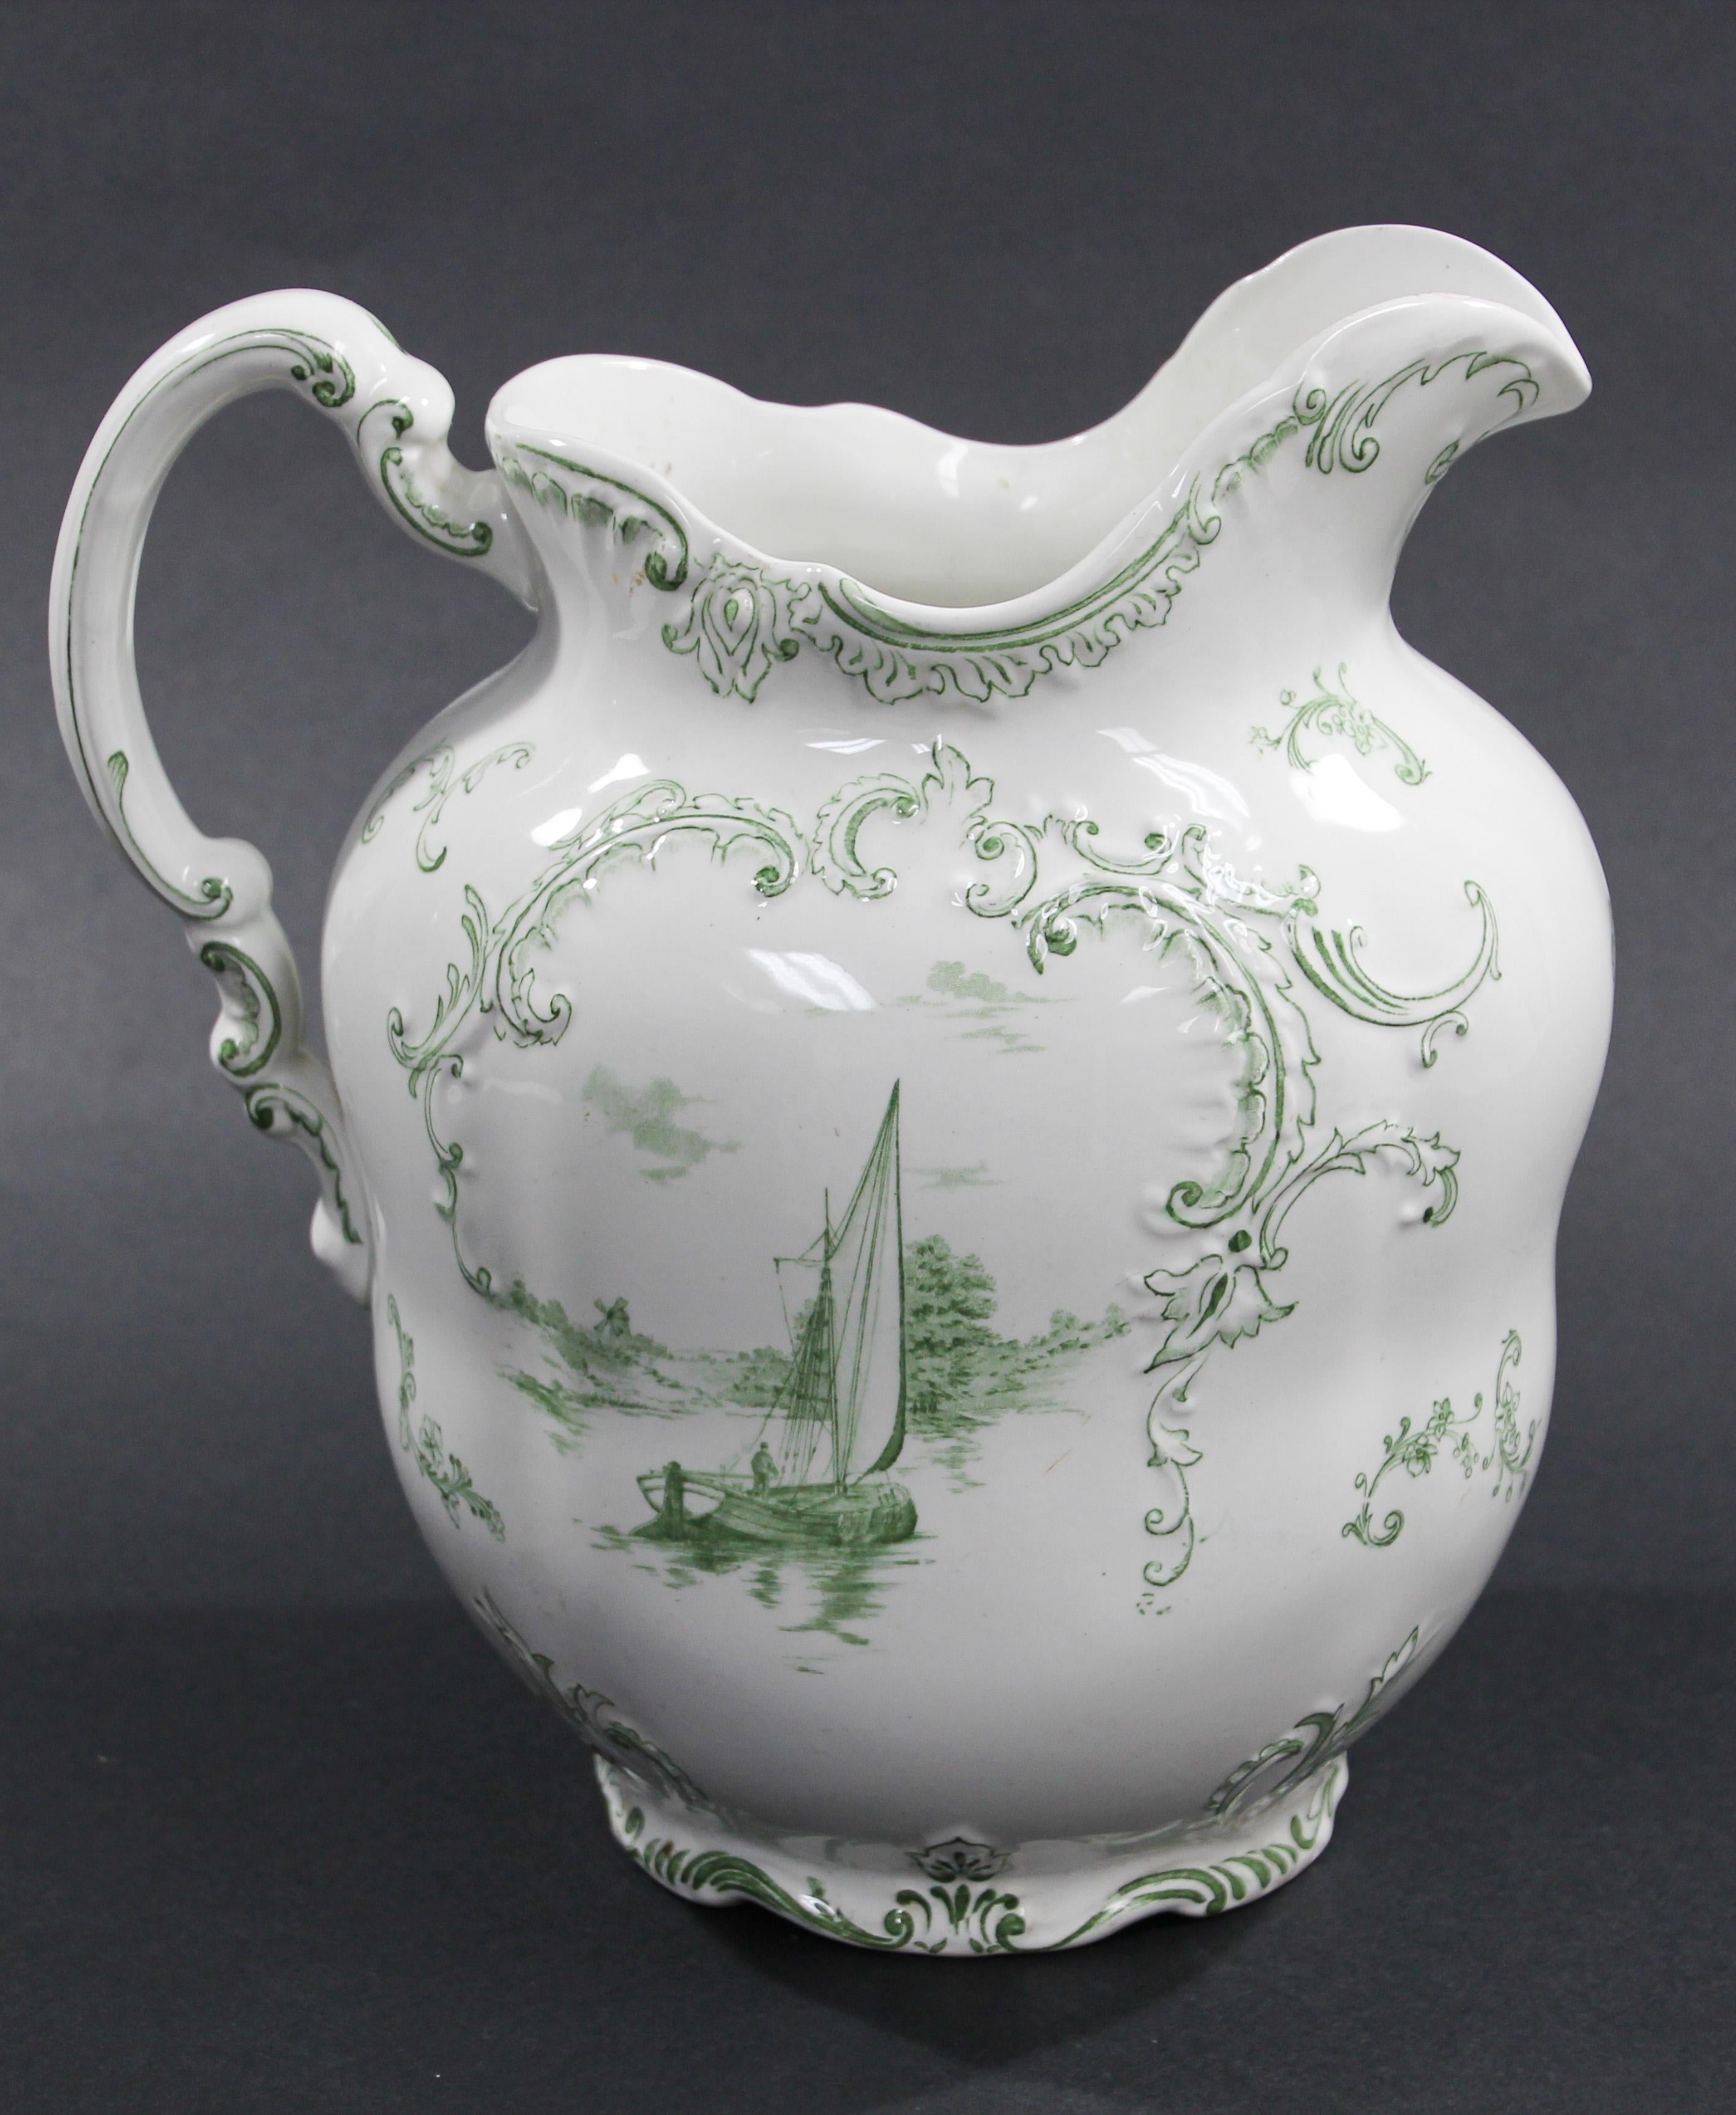 Hand-Crafted Large Ceramic Pitcher Green and White by Royal Delft England